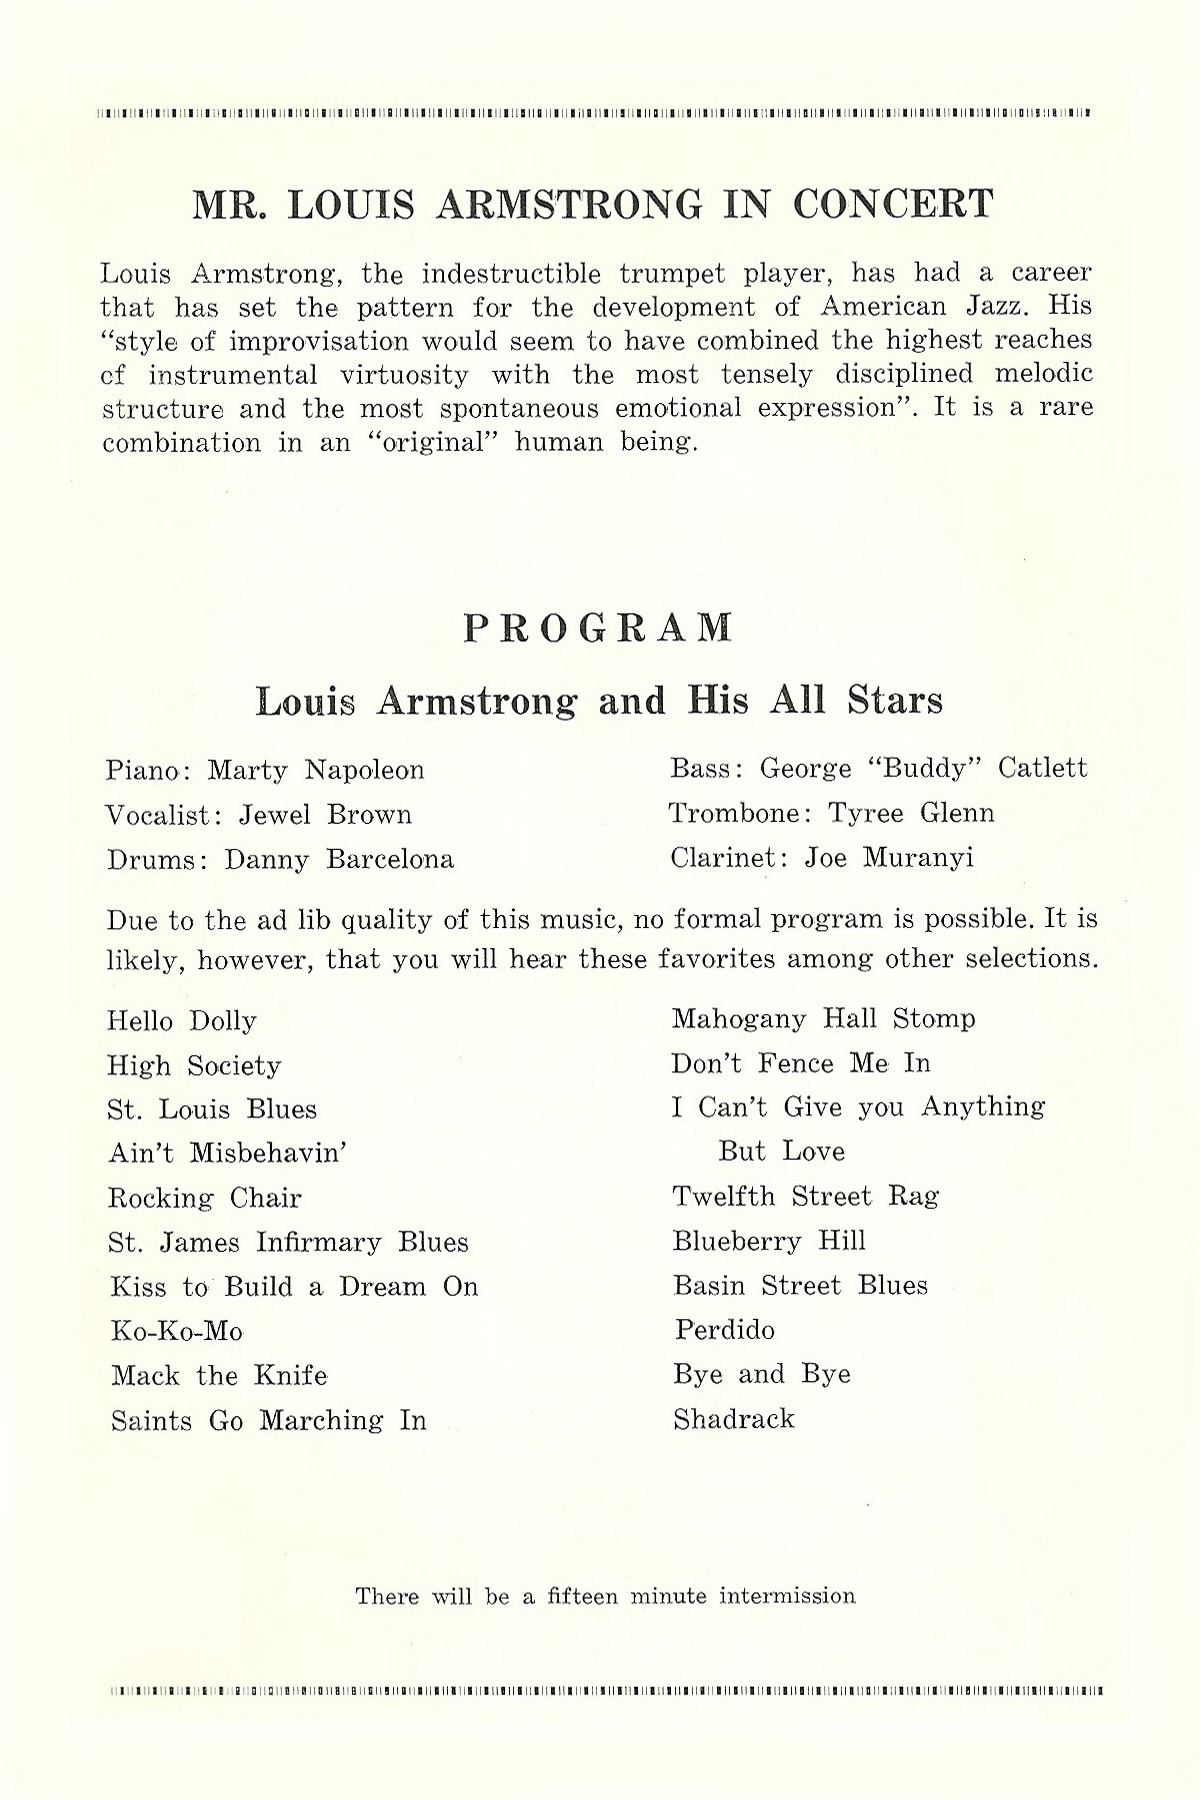 Concert Program For Louis Armstrong, December 2 1967 Page 4